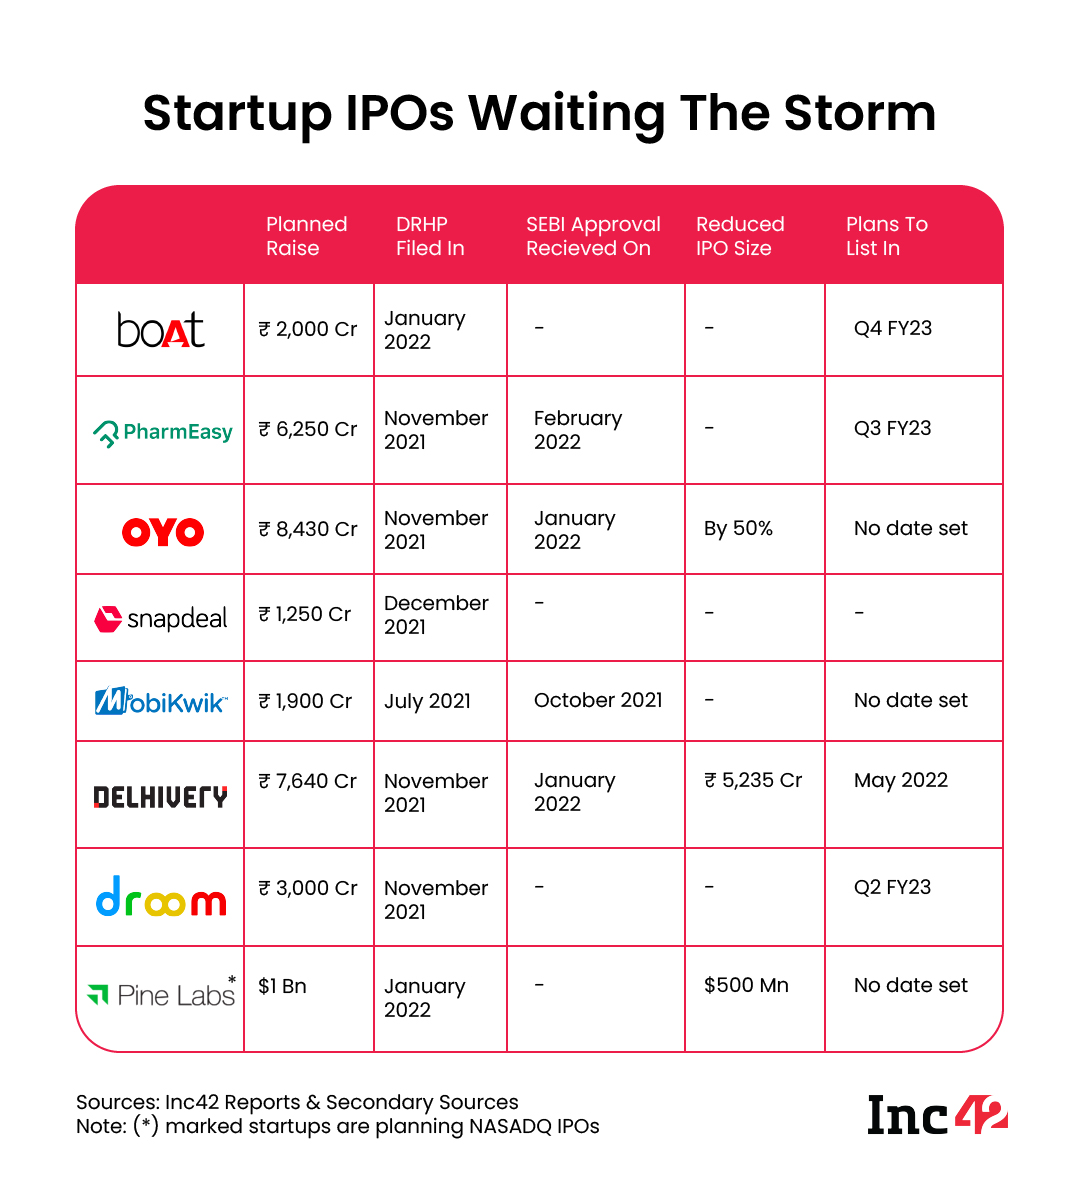 Startup IPOs Waiting the Storm